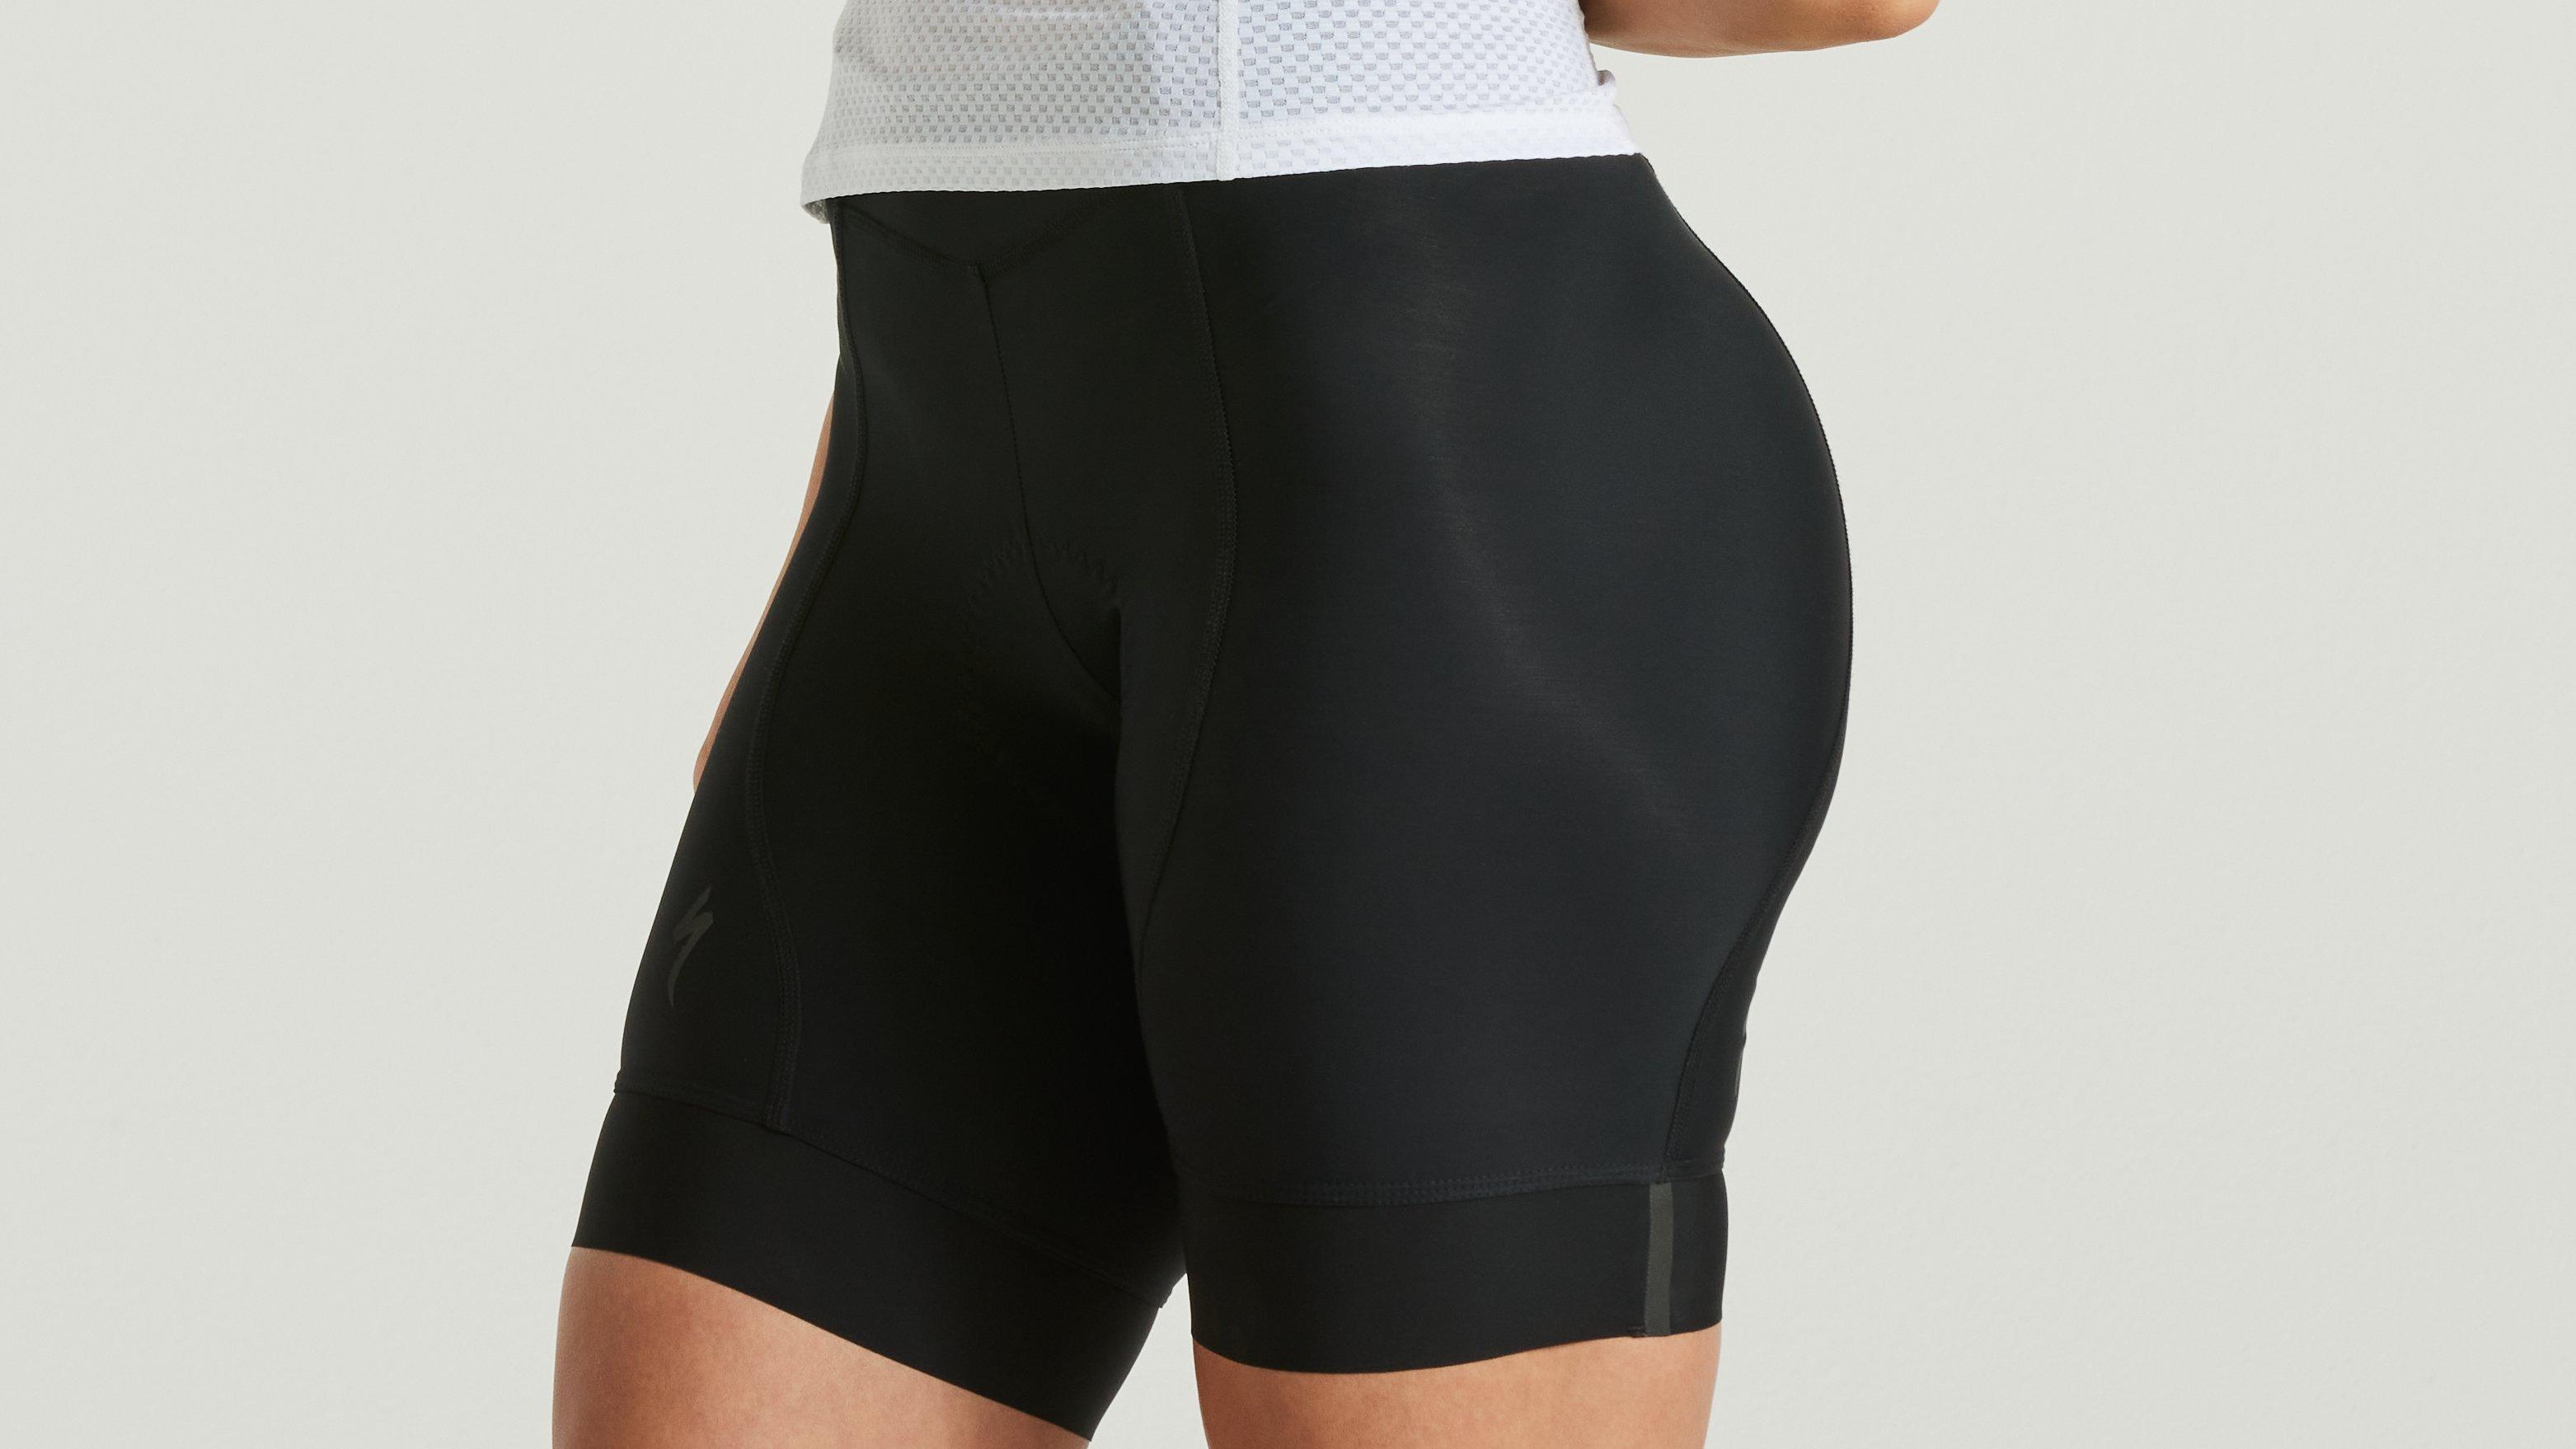 SHORTS SPECIALIZED RBX BLK M MD - DTLA Bikes